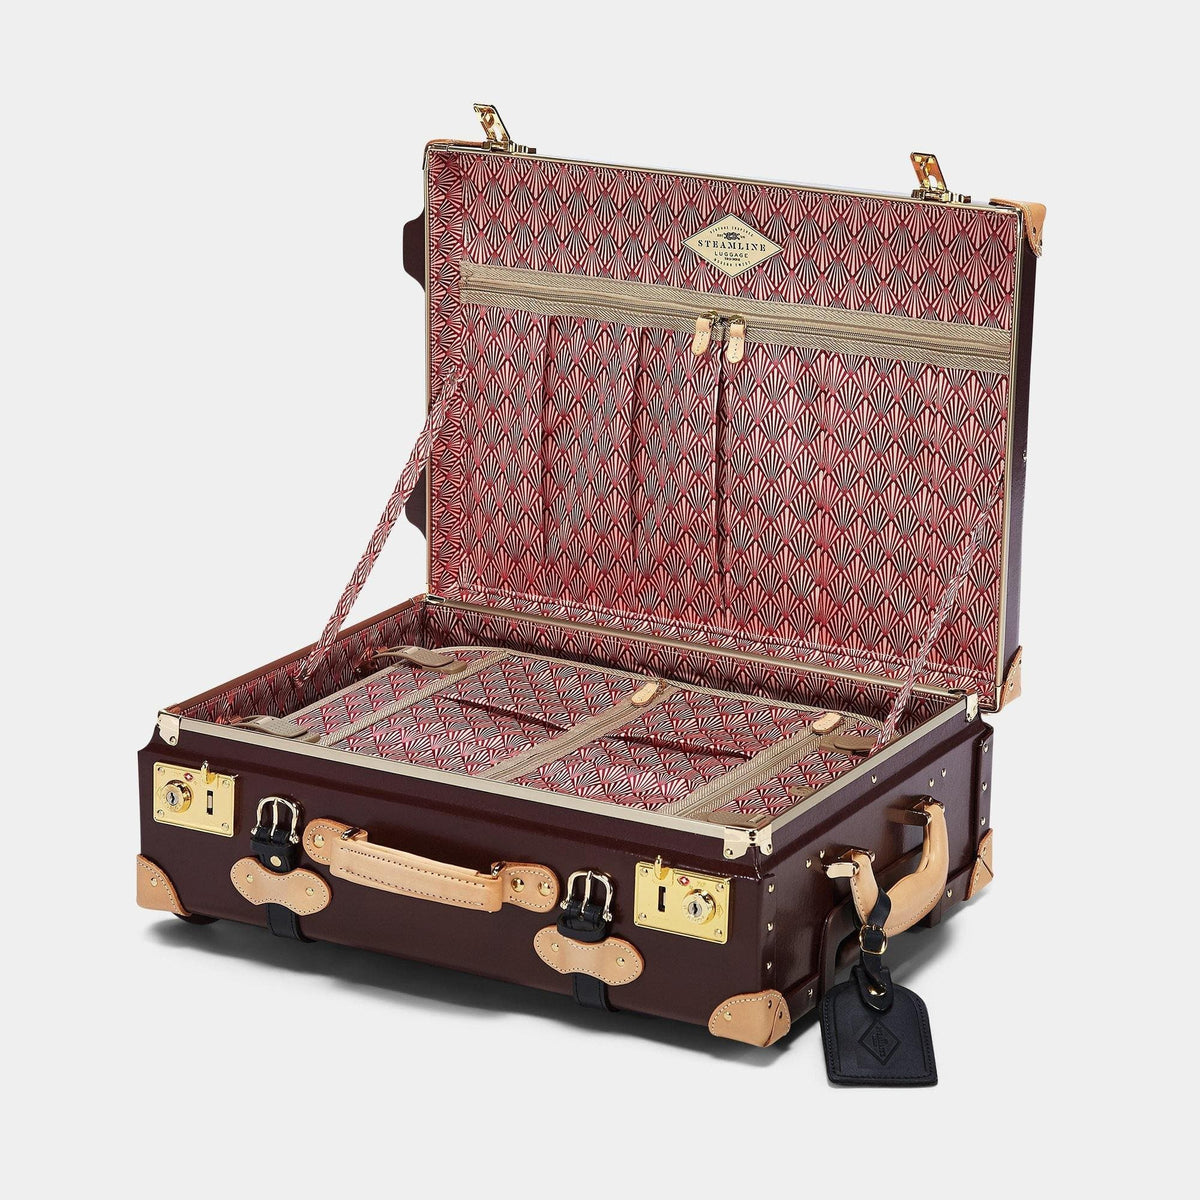 The Architect - Burgundy Carryon Carryon Steamline Luggage 